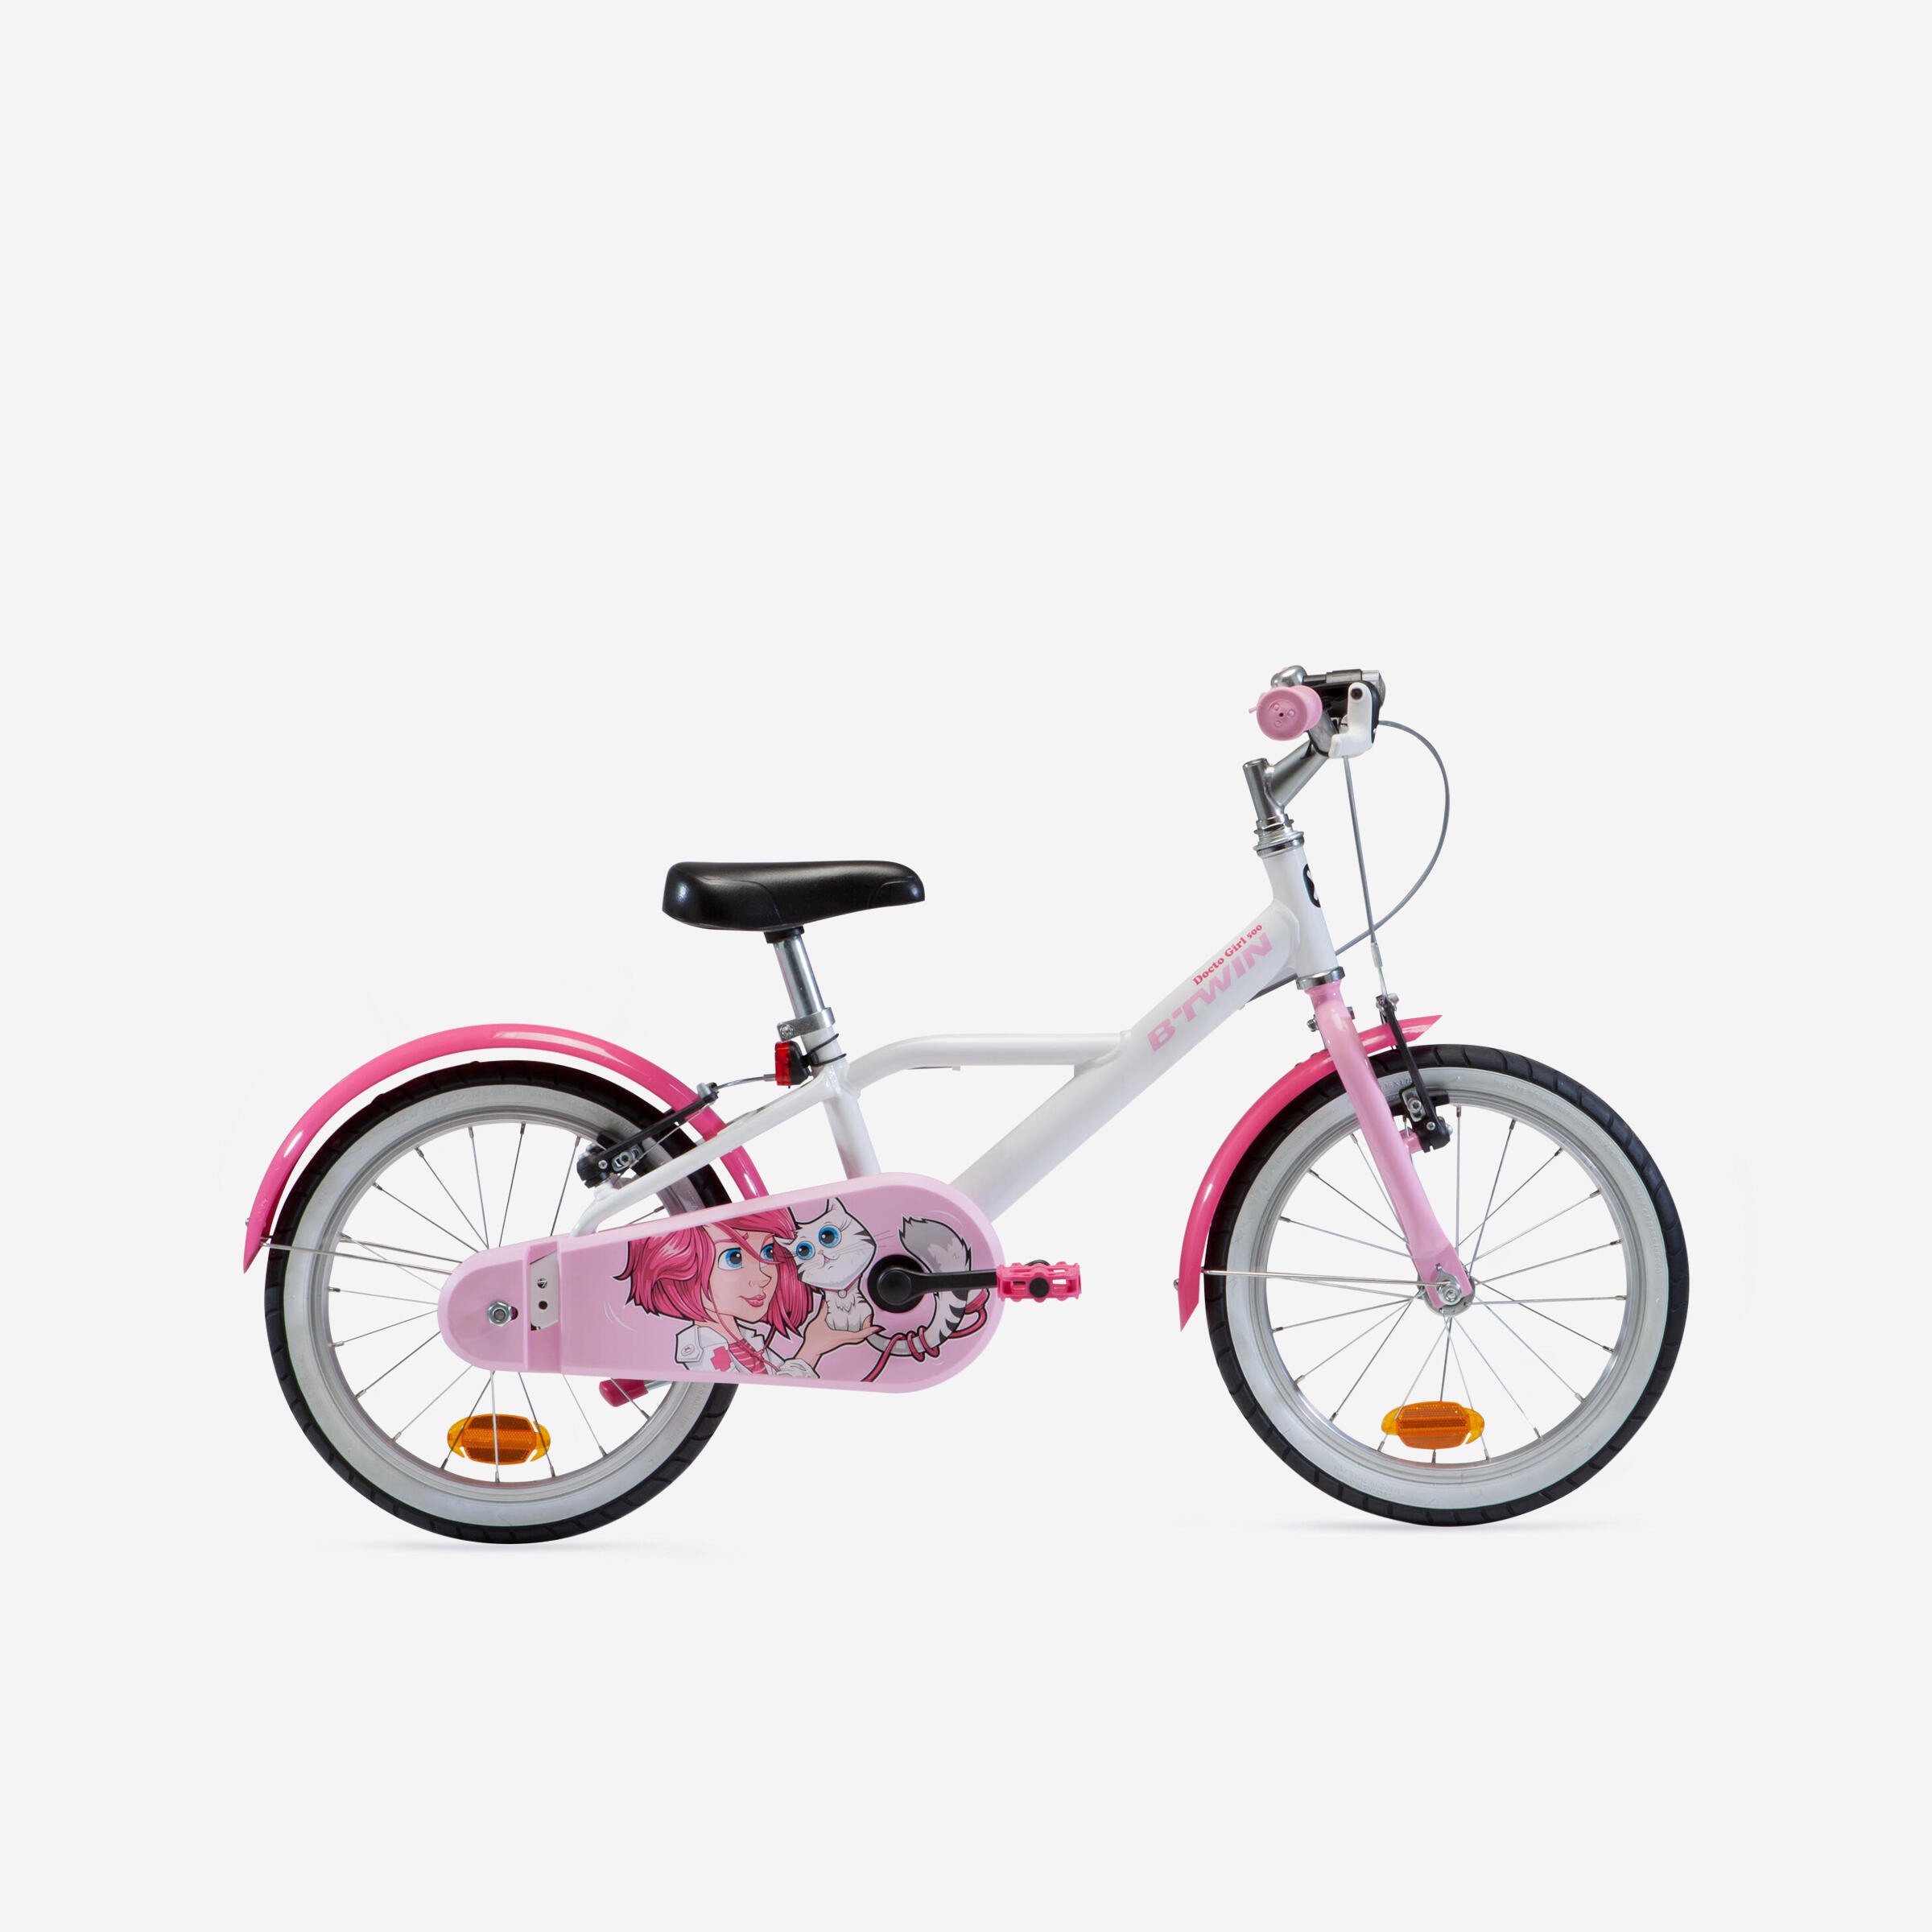 BTWIN 16 Inch KIDS BIKE Doctogirl 500 4-6 YEARS OLD - Pink